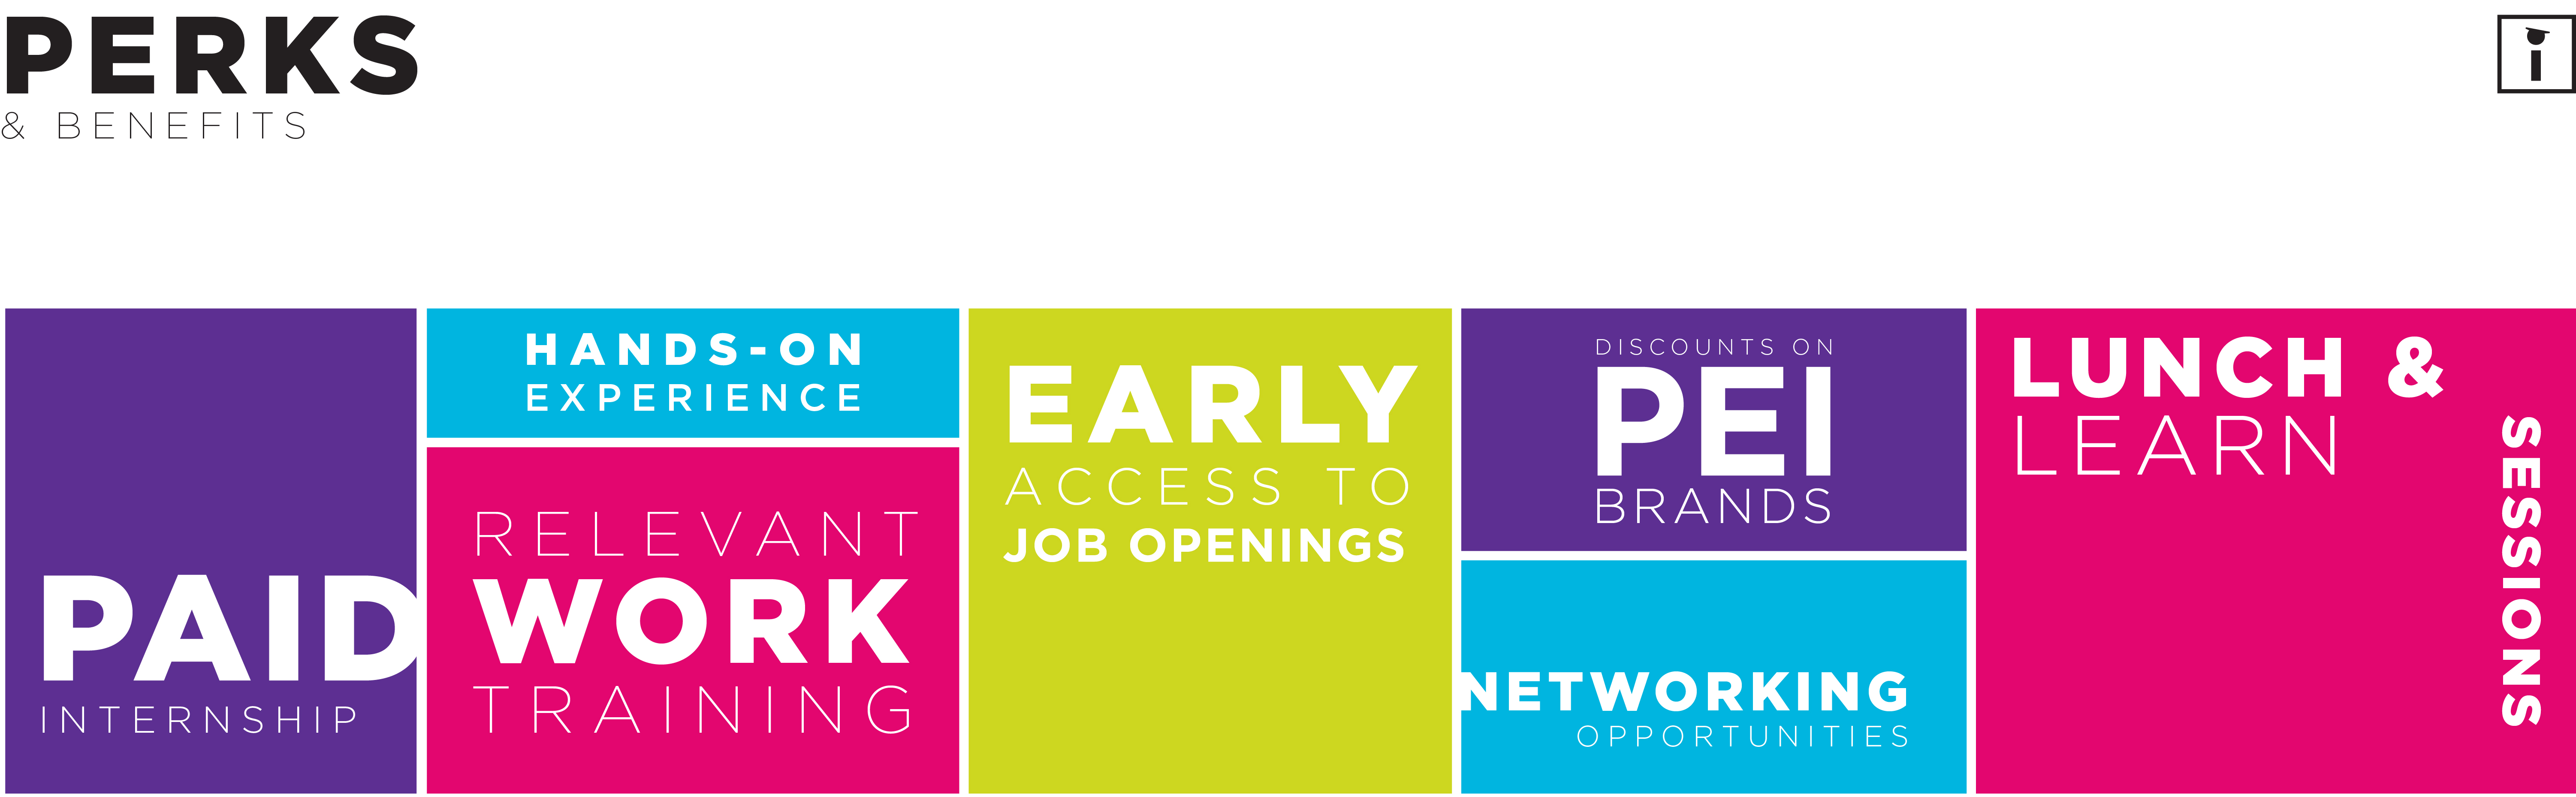 Internship Banner Perks and Benefits - Paid Internship, Hands-on Experience, Discounts on Pei Brand, Relevant Work Training, Early Access to Job Openings, Networking Opportunities, Lunch Learn, and Sessions